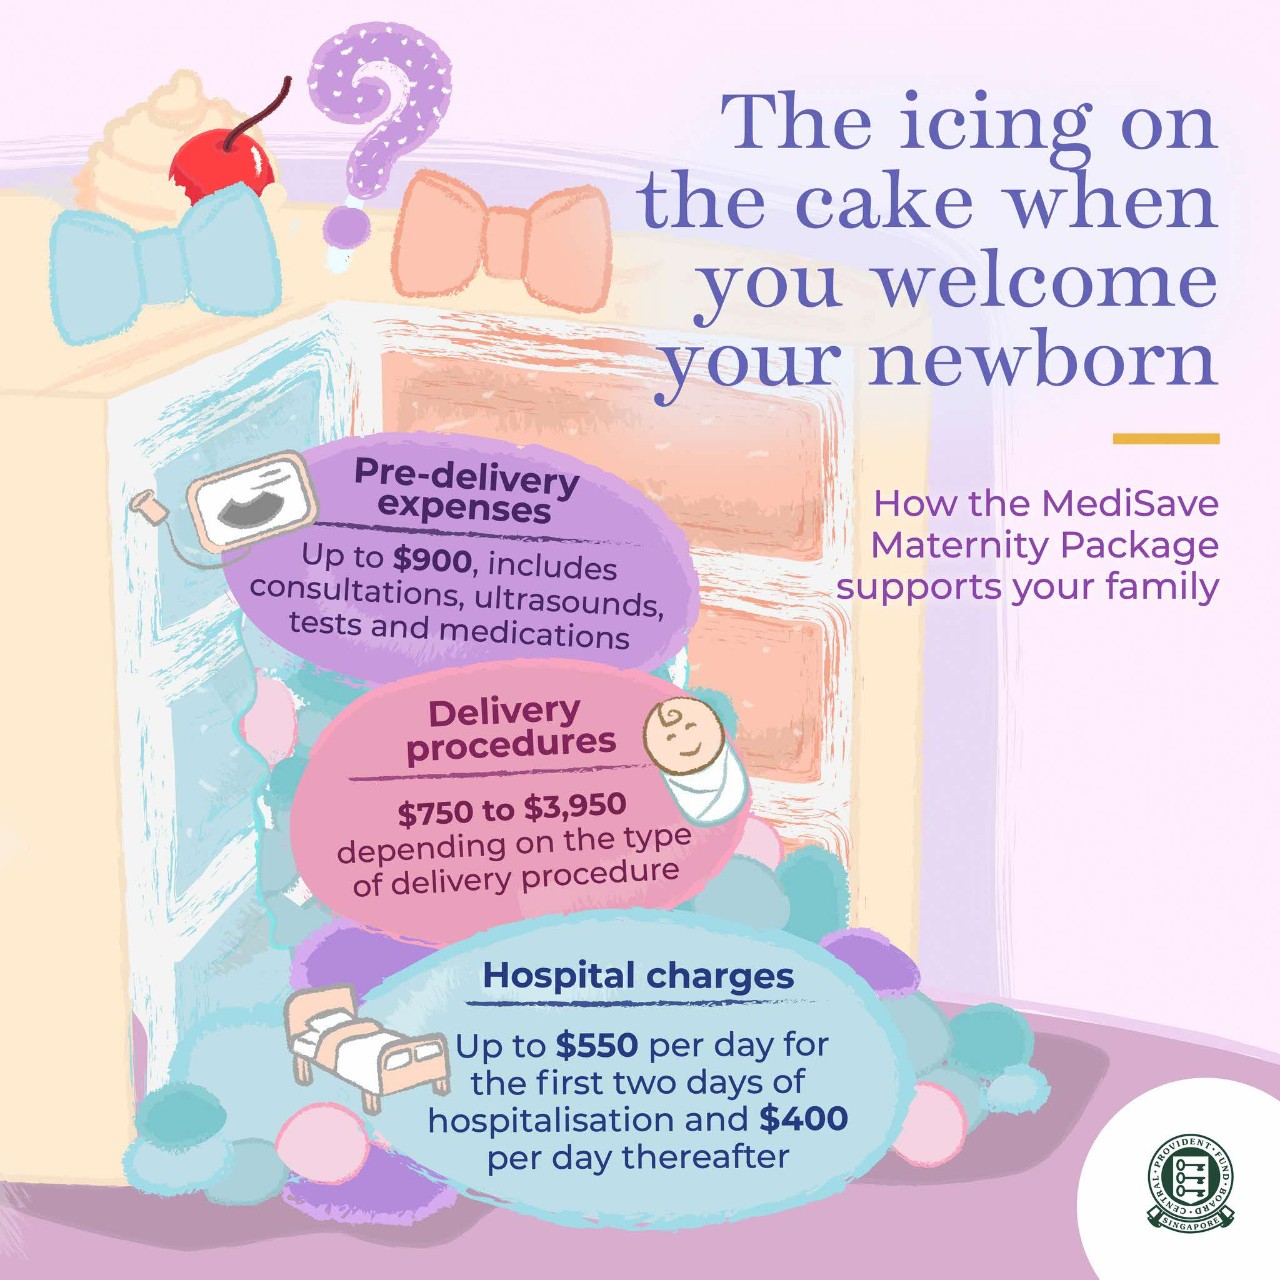 How the MediSave Maternity Package supports your family